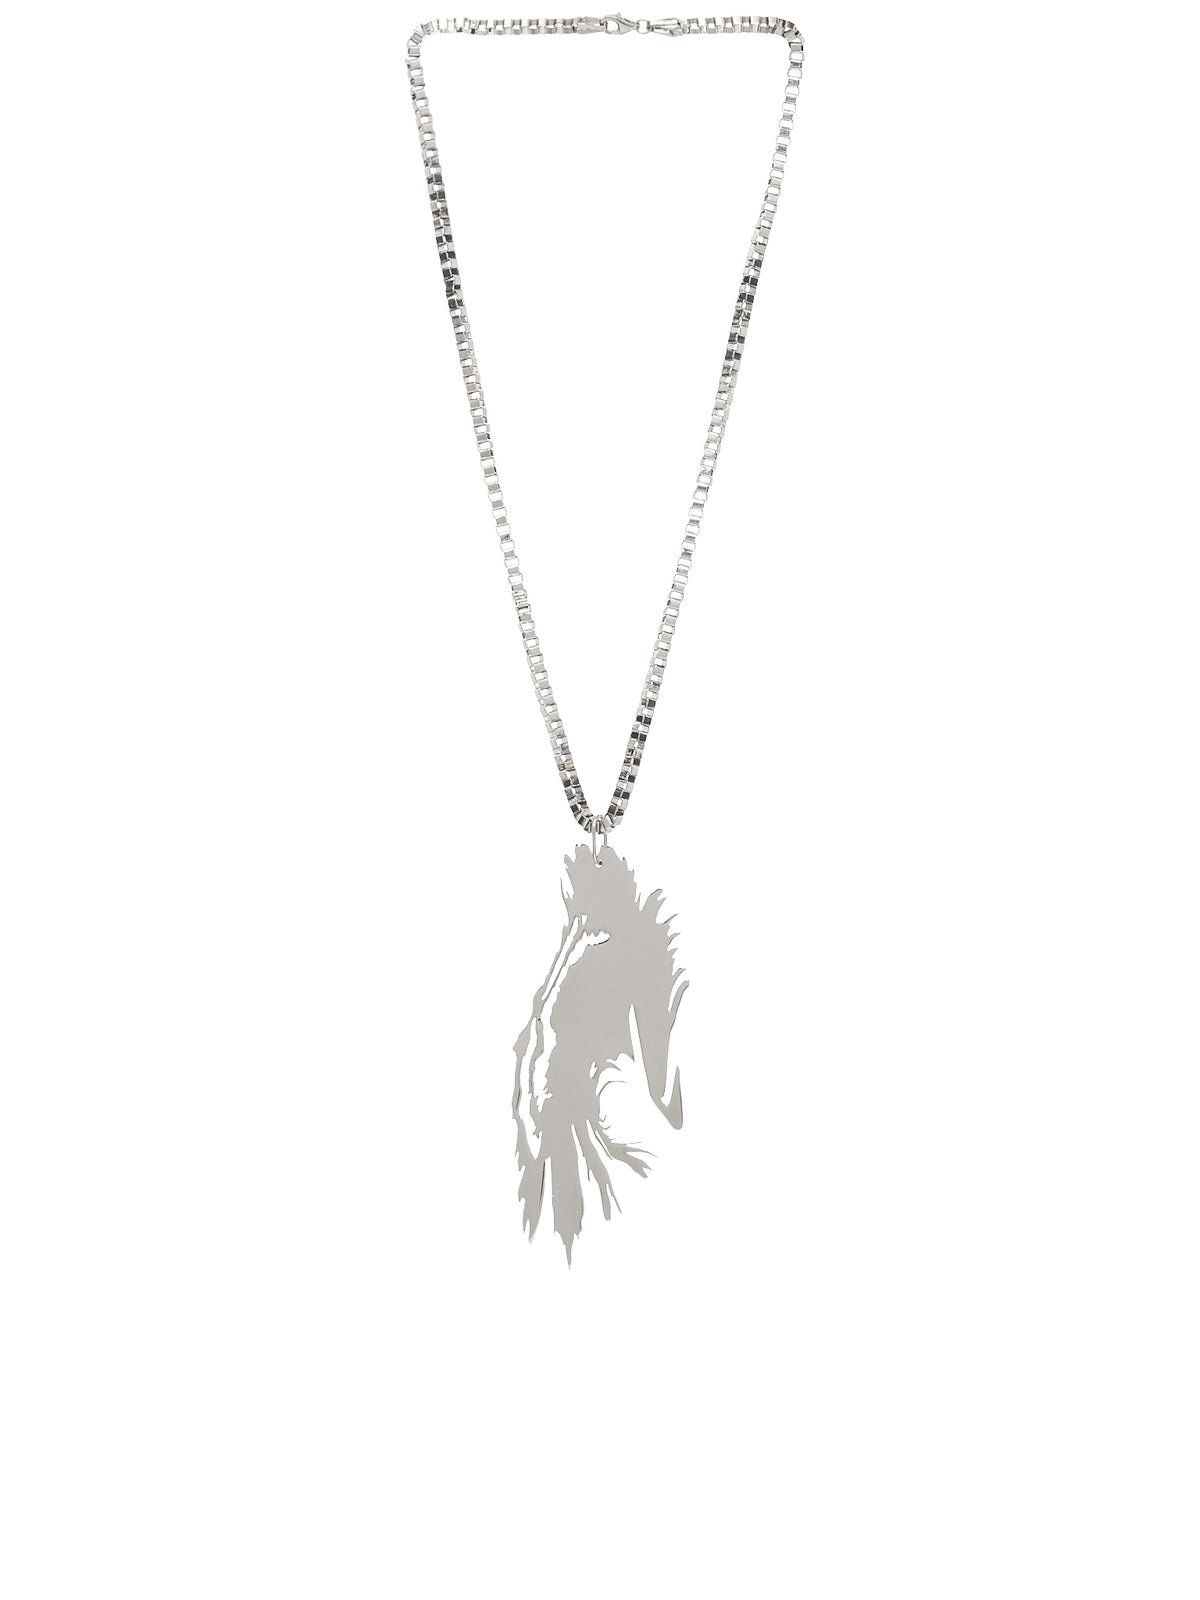 Lēo Silver Necklace | H. Lorenzo - front